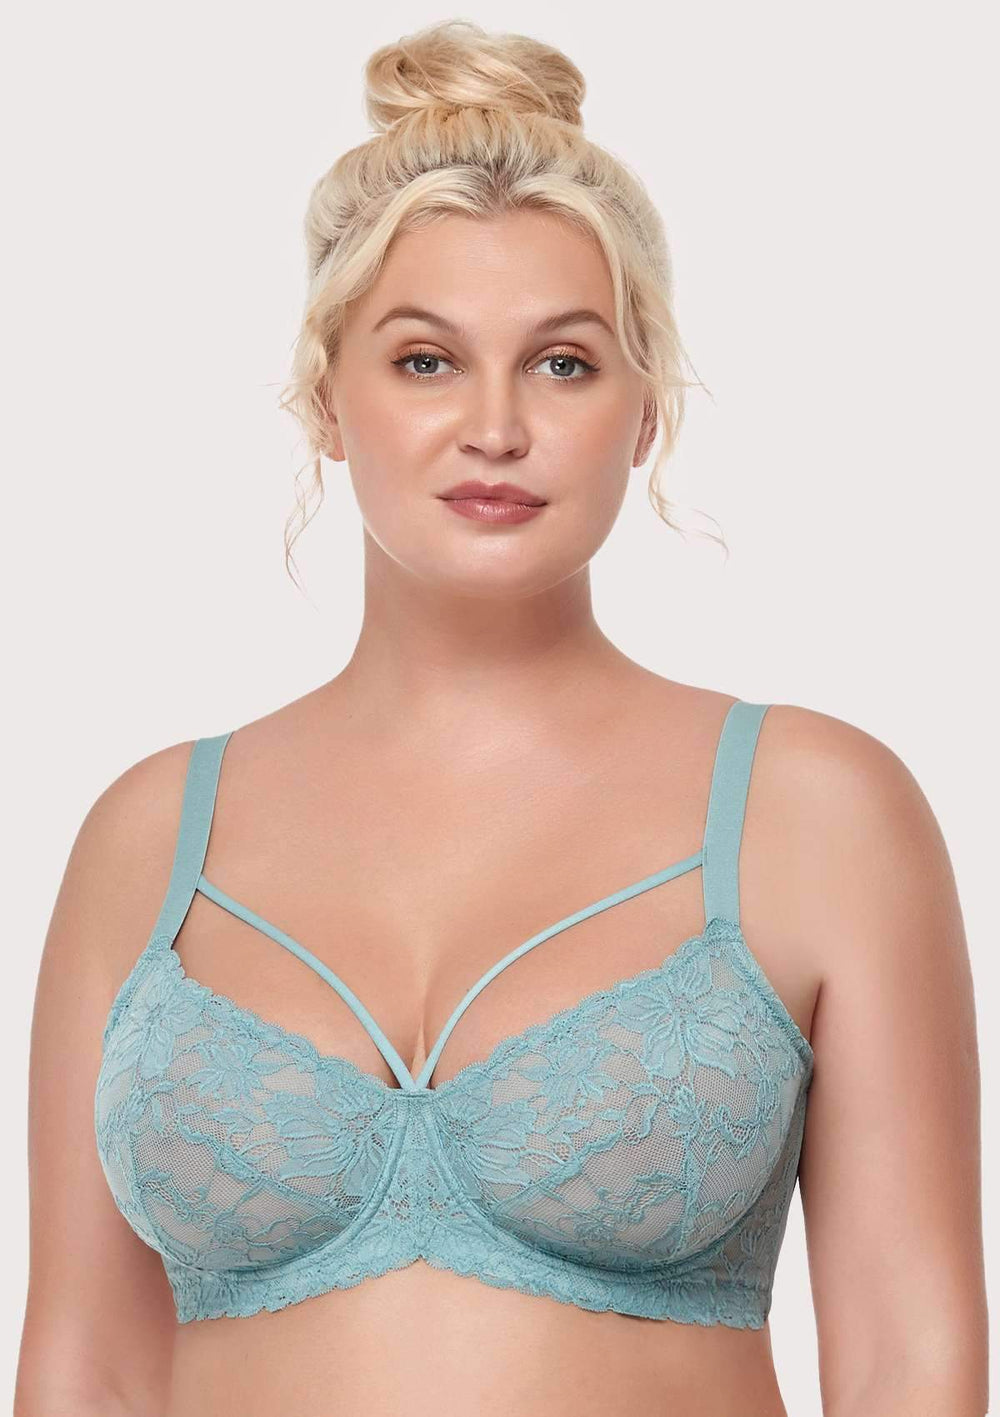 Si E' Lei Unlined bra 942 cup C: for sale at 12.74€ on